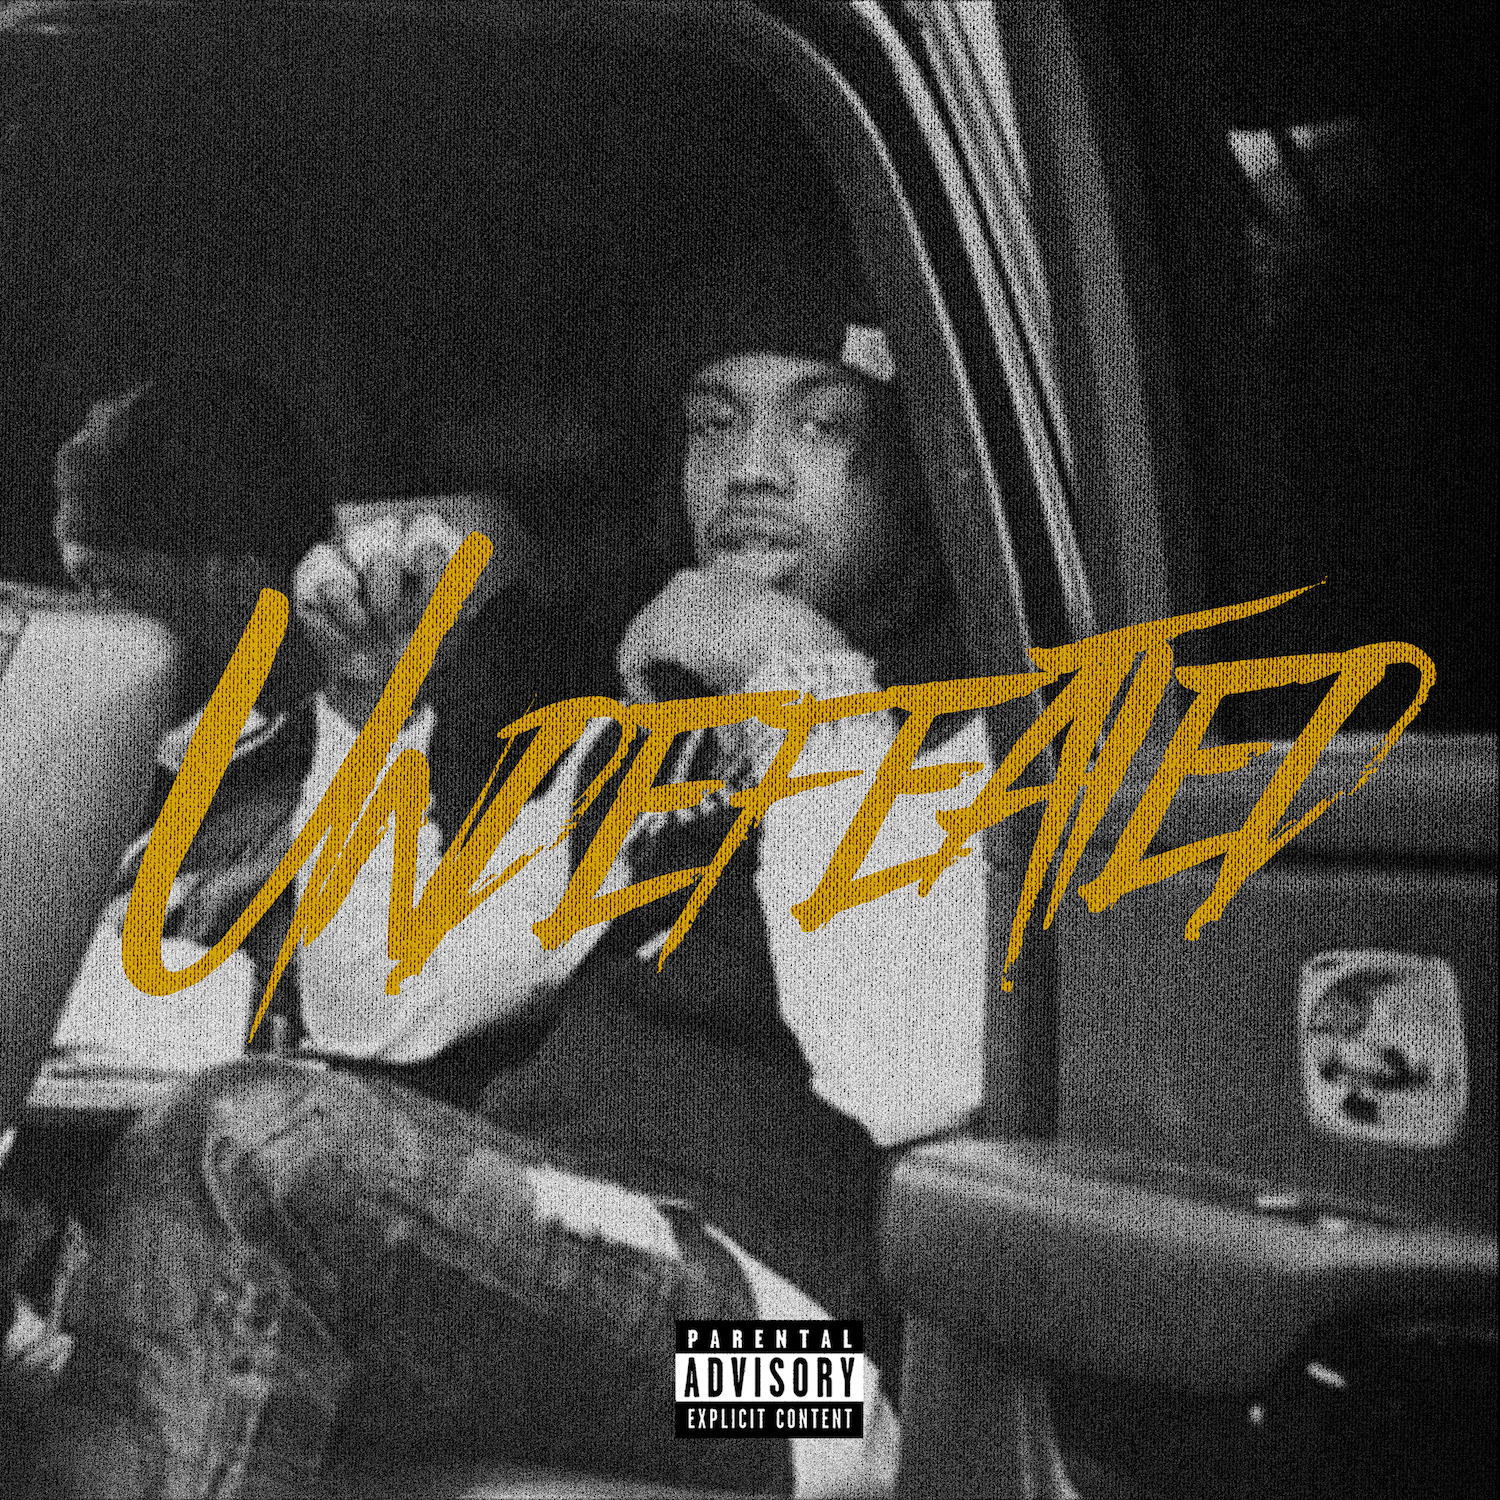 Art for Undefeated (Clean) by EST Gee